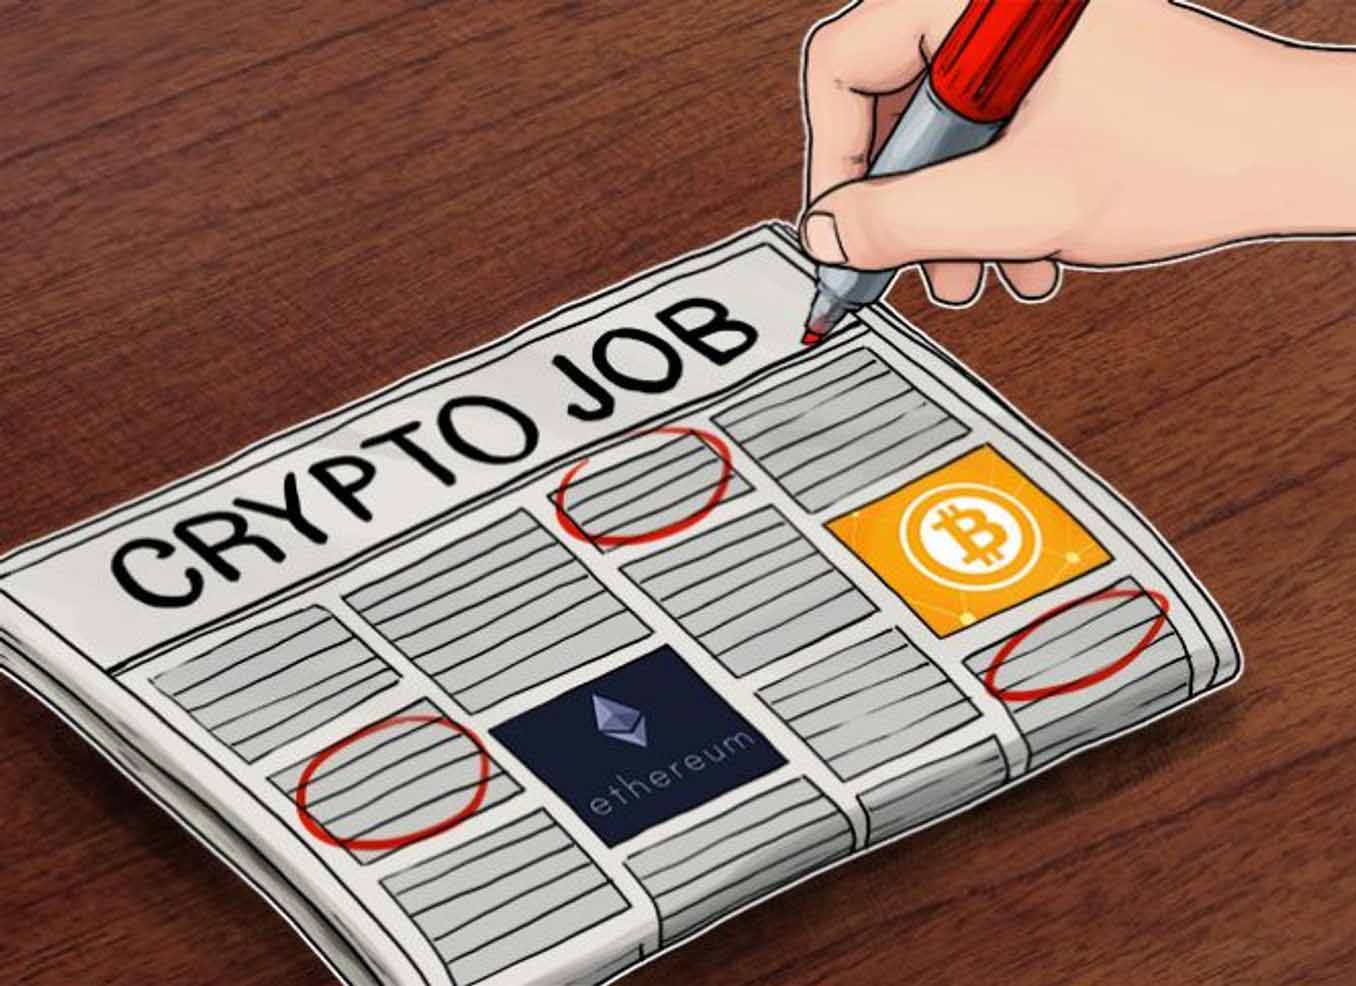 The companies are oriented to the search of personnel for engineering, computing and other technical areas with the promise of payment in cryptocurrencies, which is widely attractive for candidates